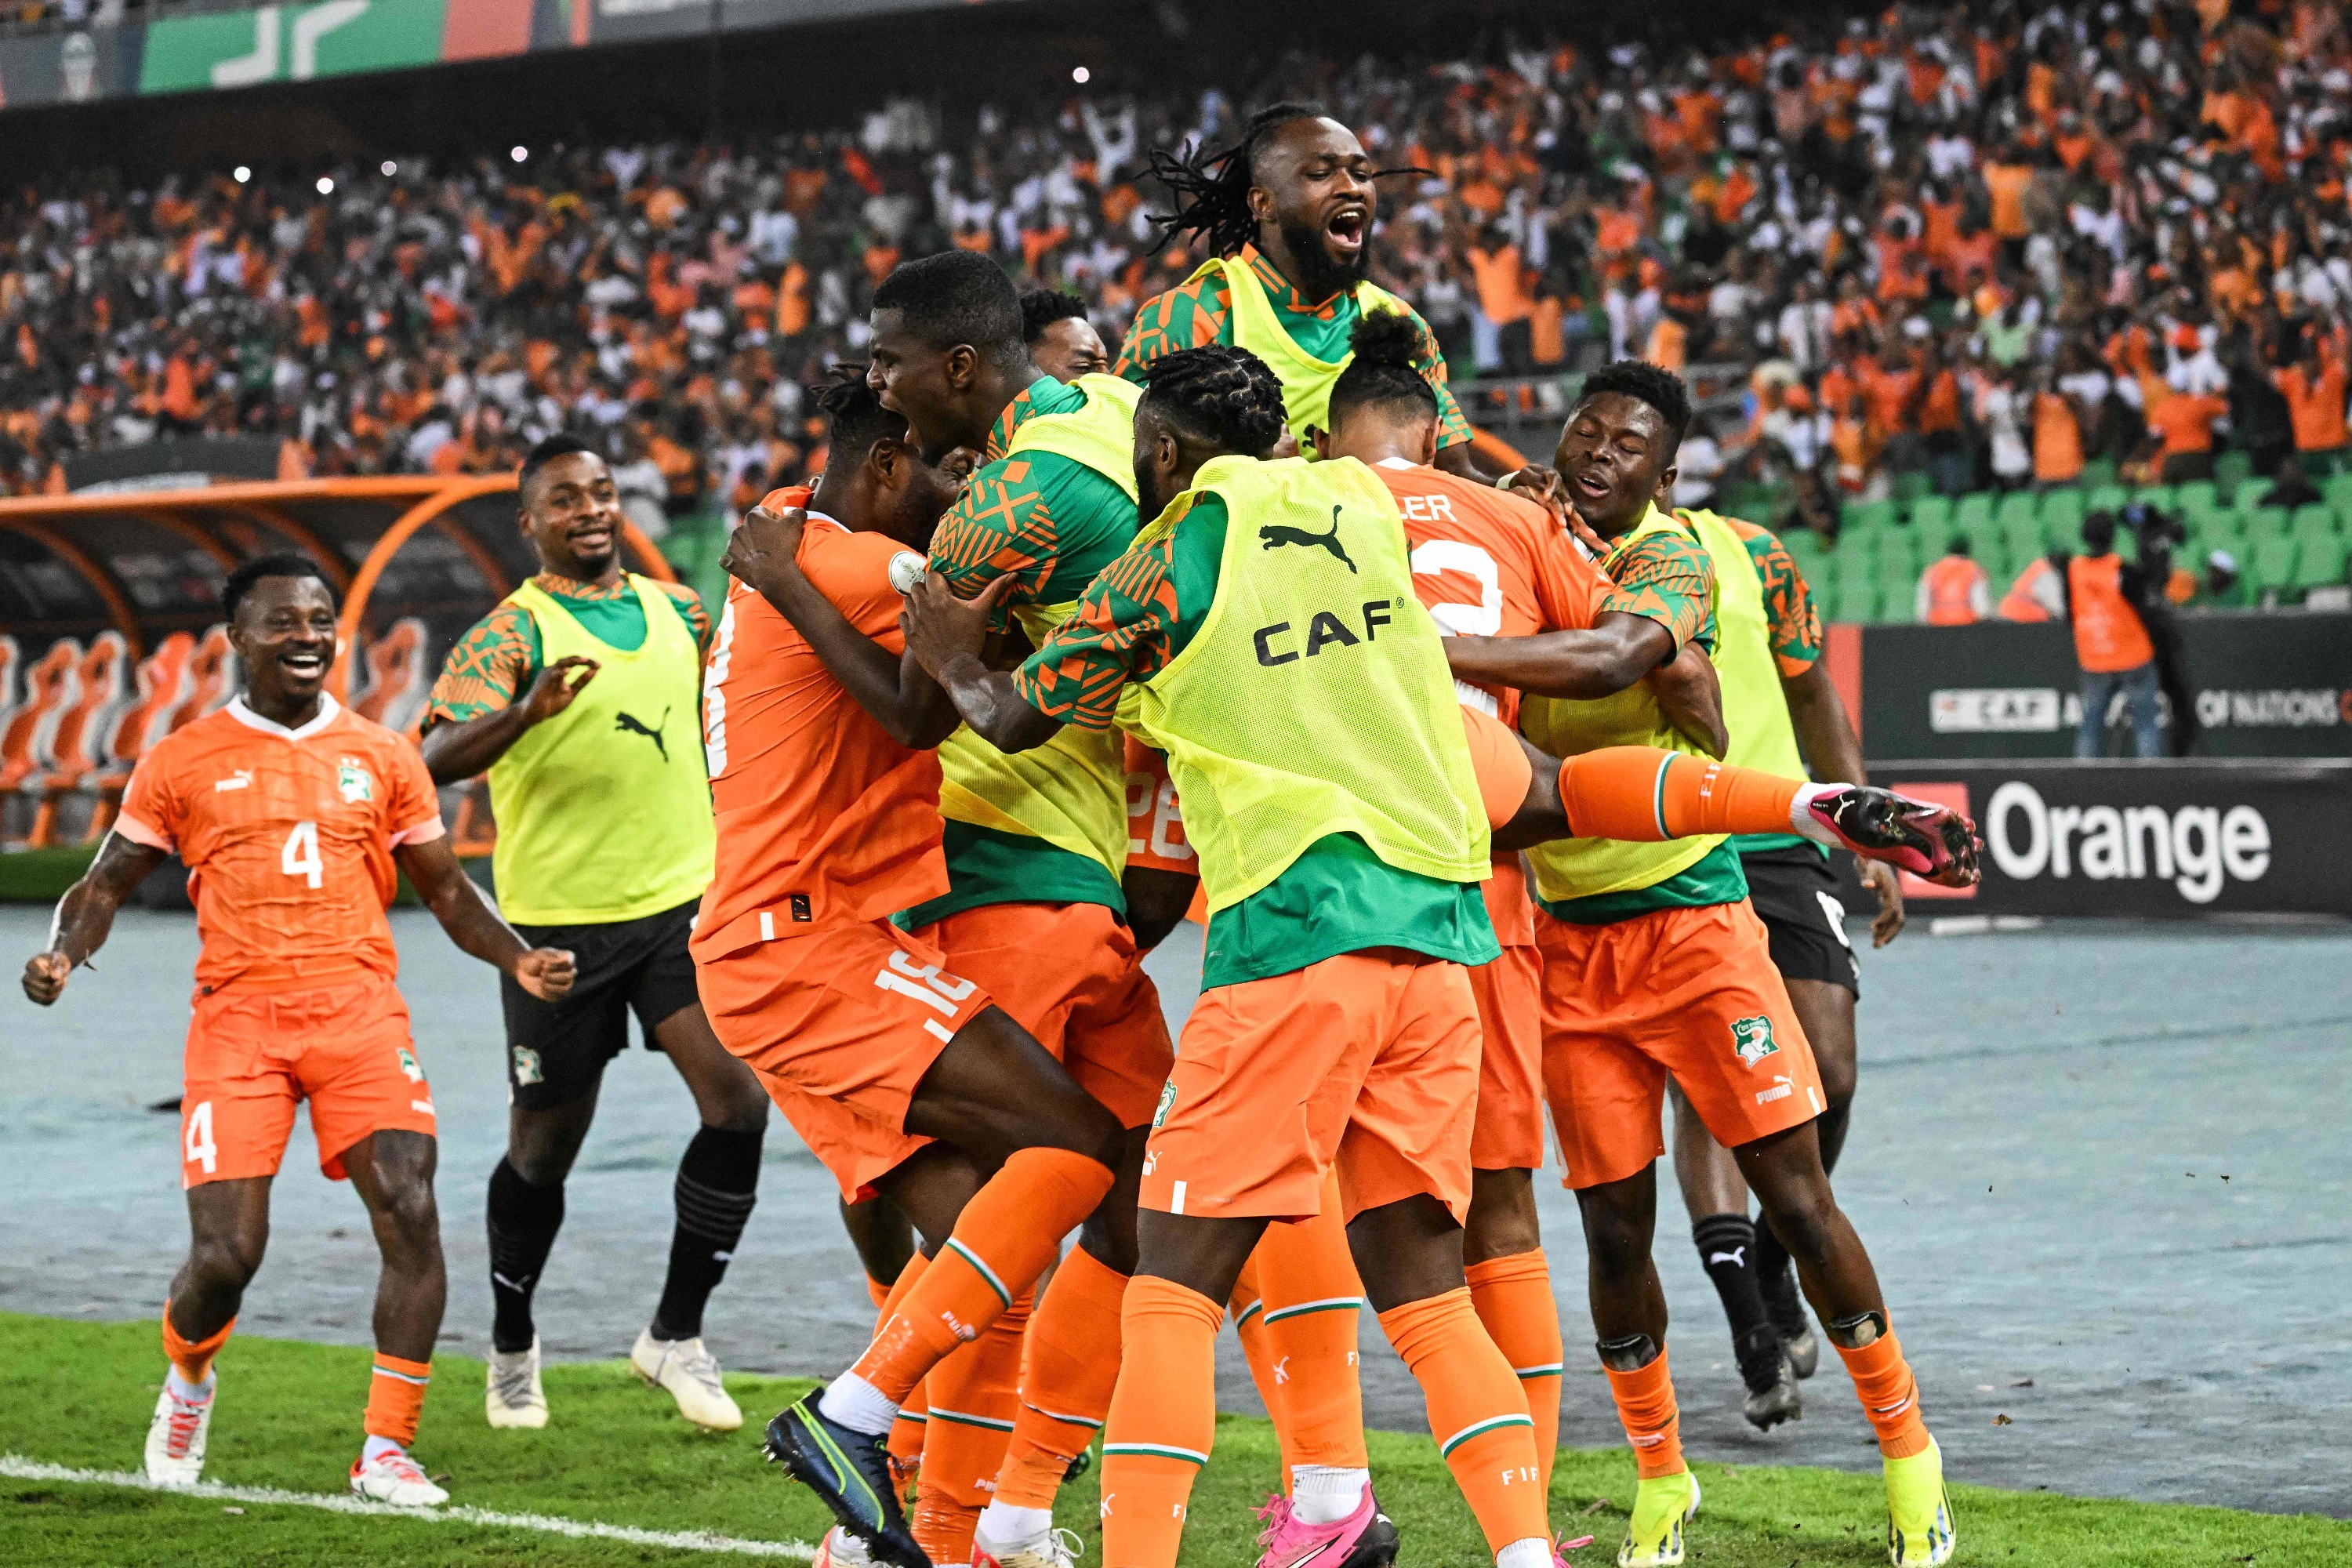 CAN: W9 will broadcast the Ivory Coast – Nigeria final unencrypted